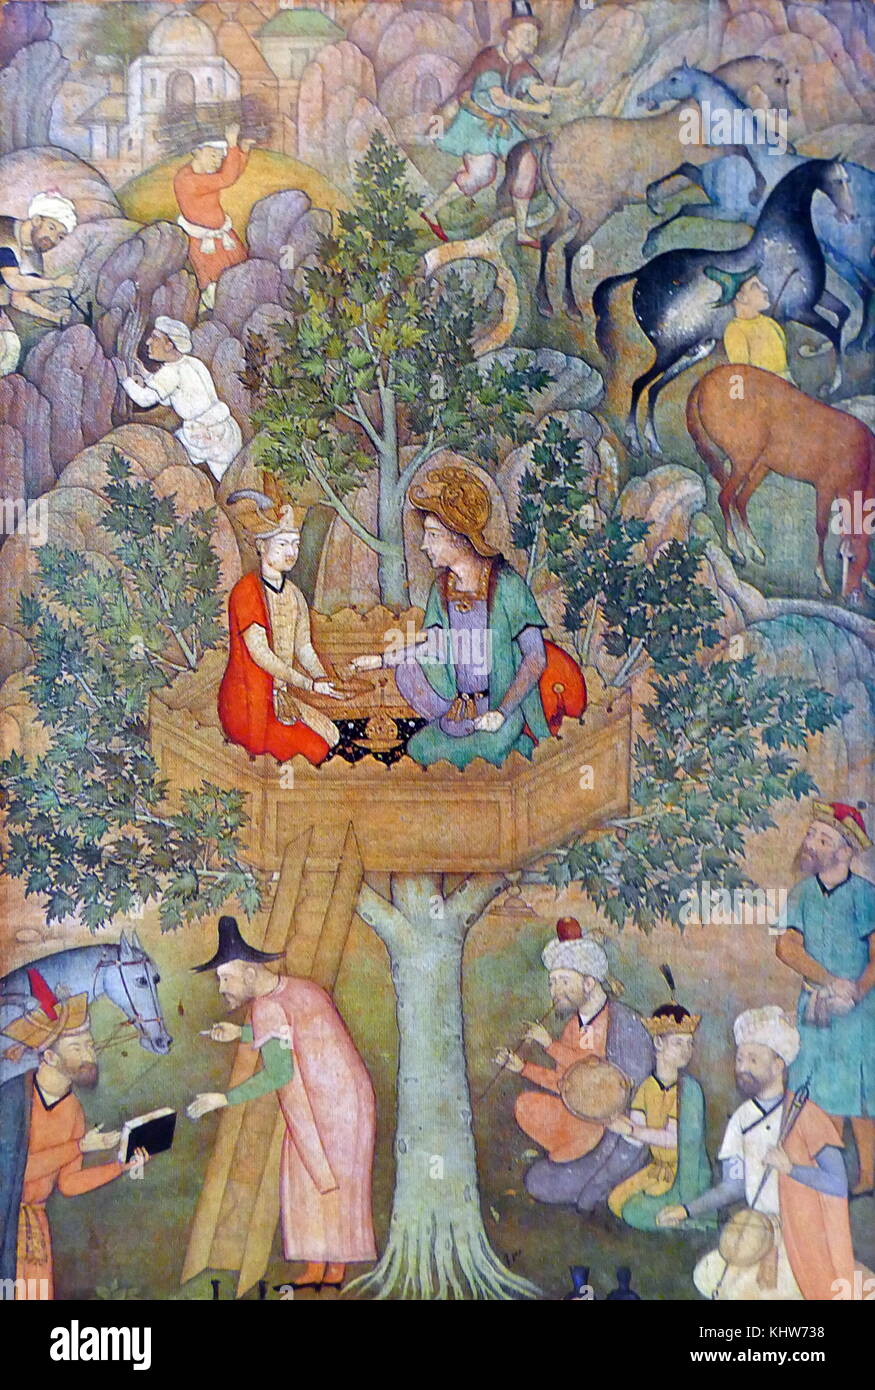 Painting depicting Alexander the Great seated in a tree-platform taking a golden cup from a scholar kneeling beside him; he wears an Italian renaissance helmet embossed with a galloping horse and reclines against a bolster dressed in a pale green coat over a blue robe. Painted by an unknown Mughal artist. Dated 17th Century Stock Photo